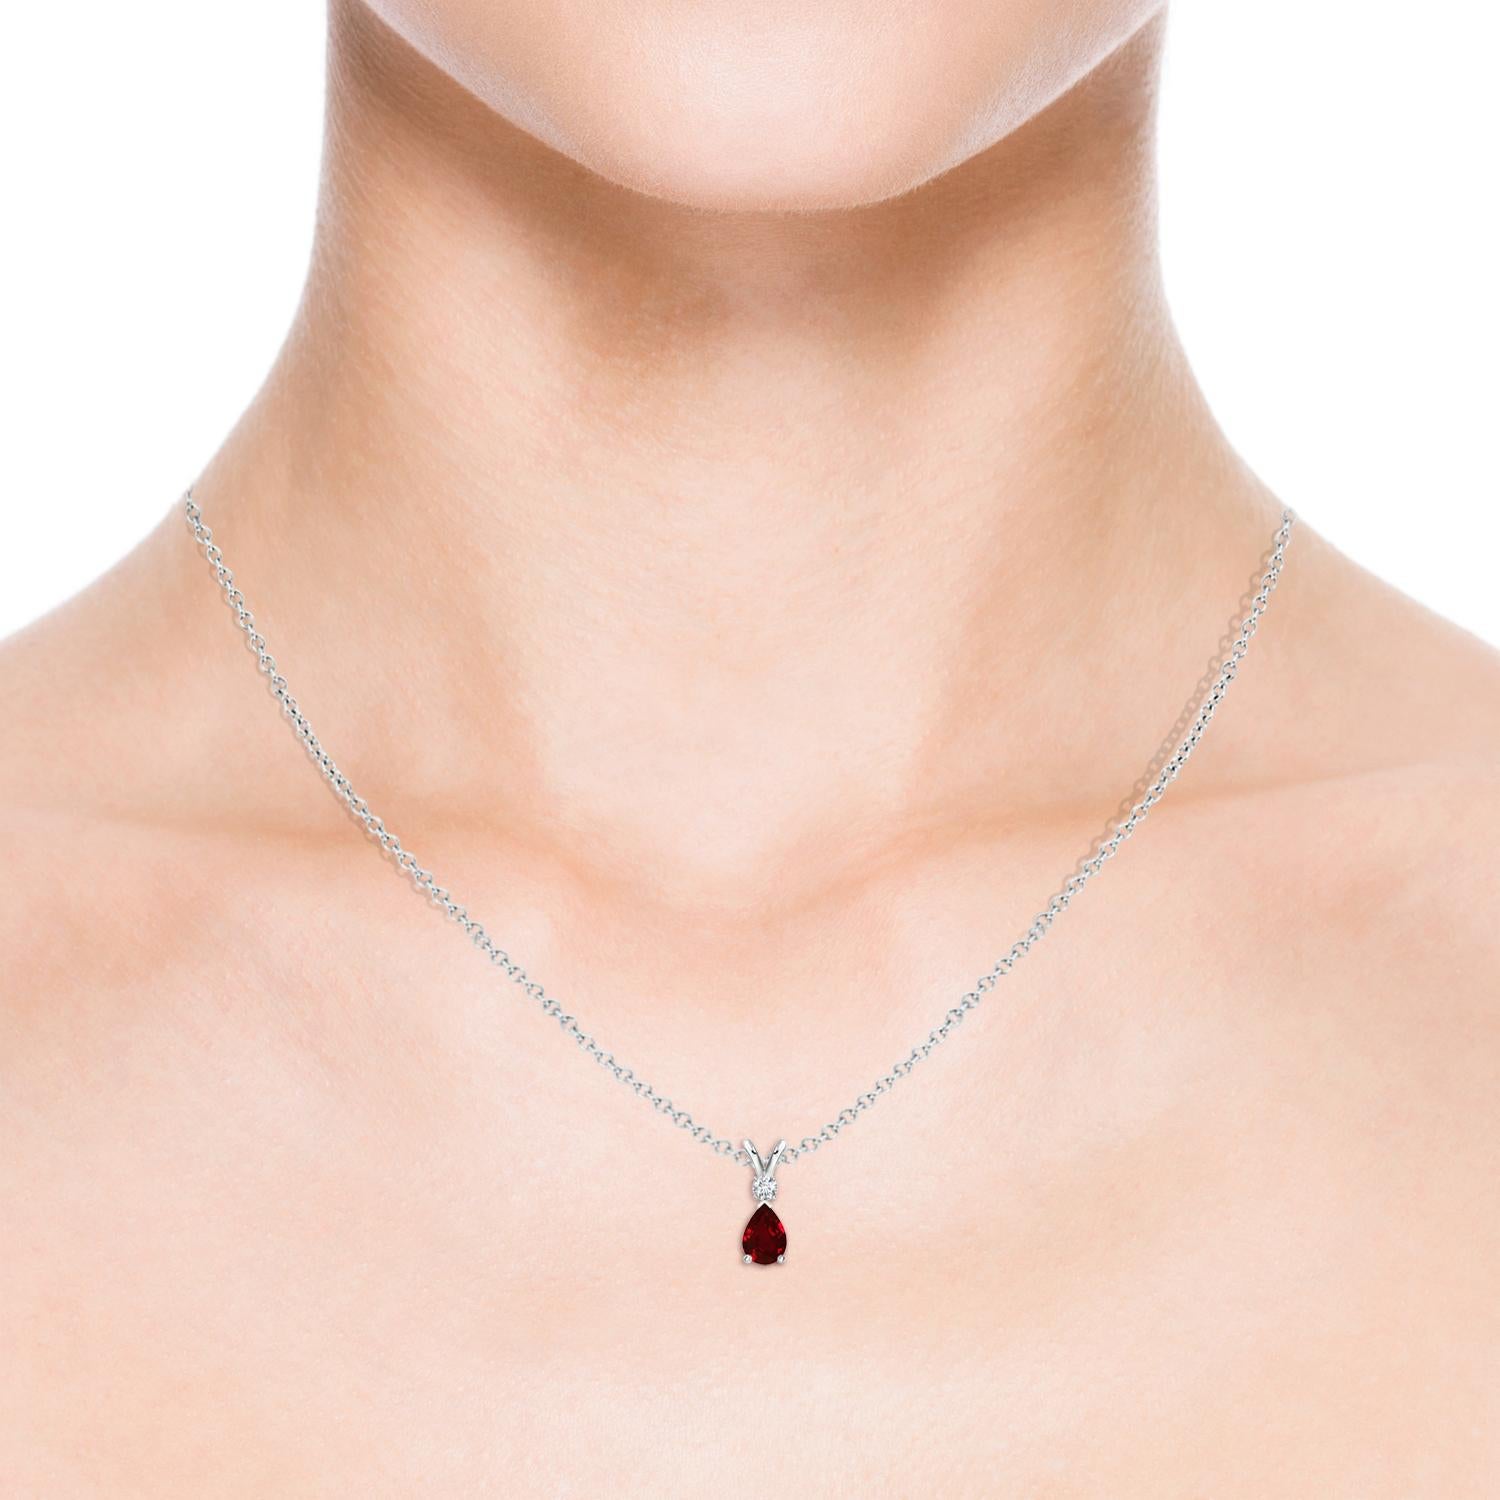 Modern ANGARA 0.40ct Ruby Teardrop Pendant with Diamond in 14K White Gold For Sale